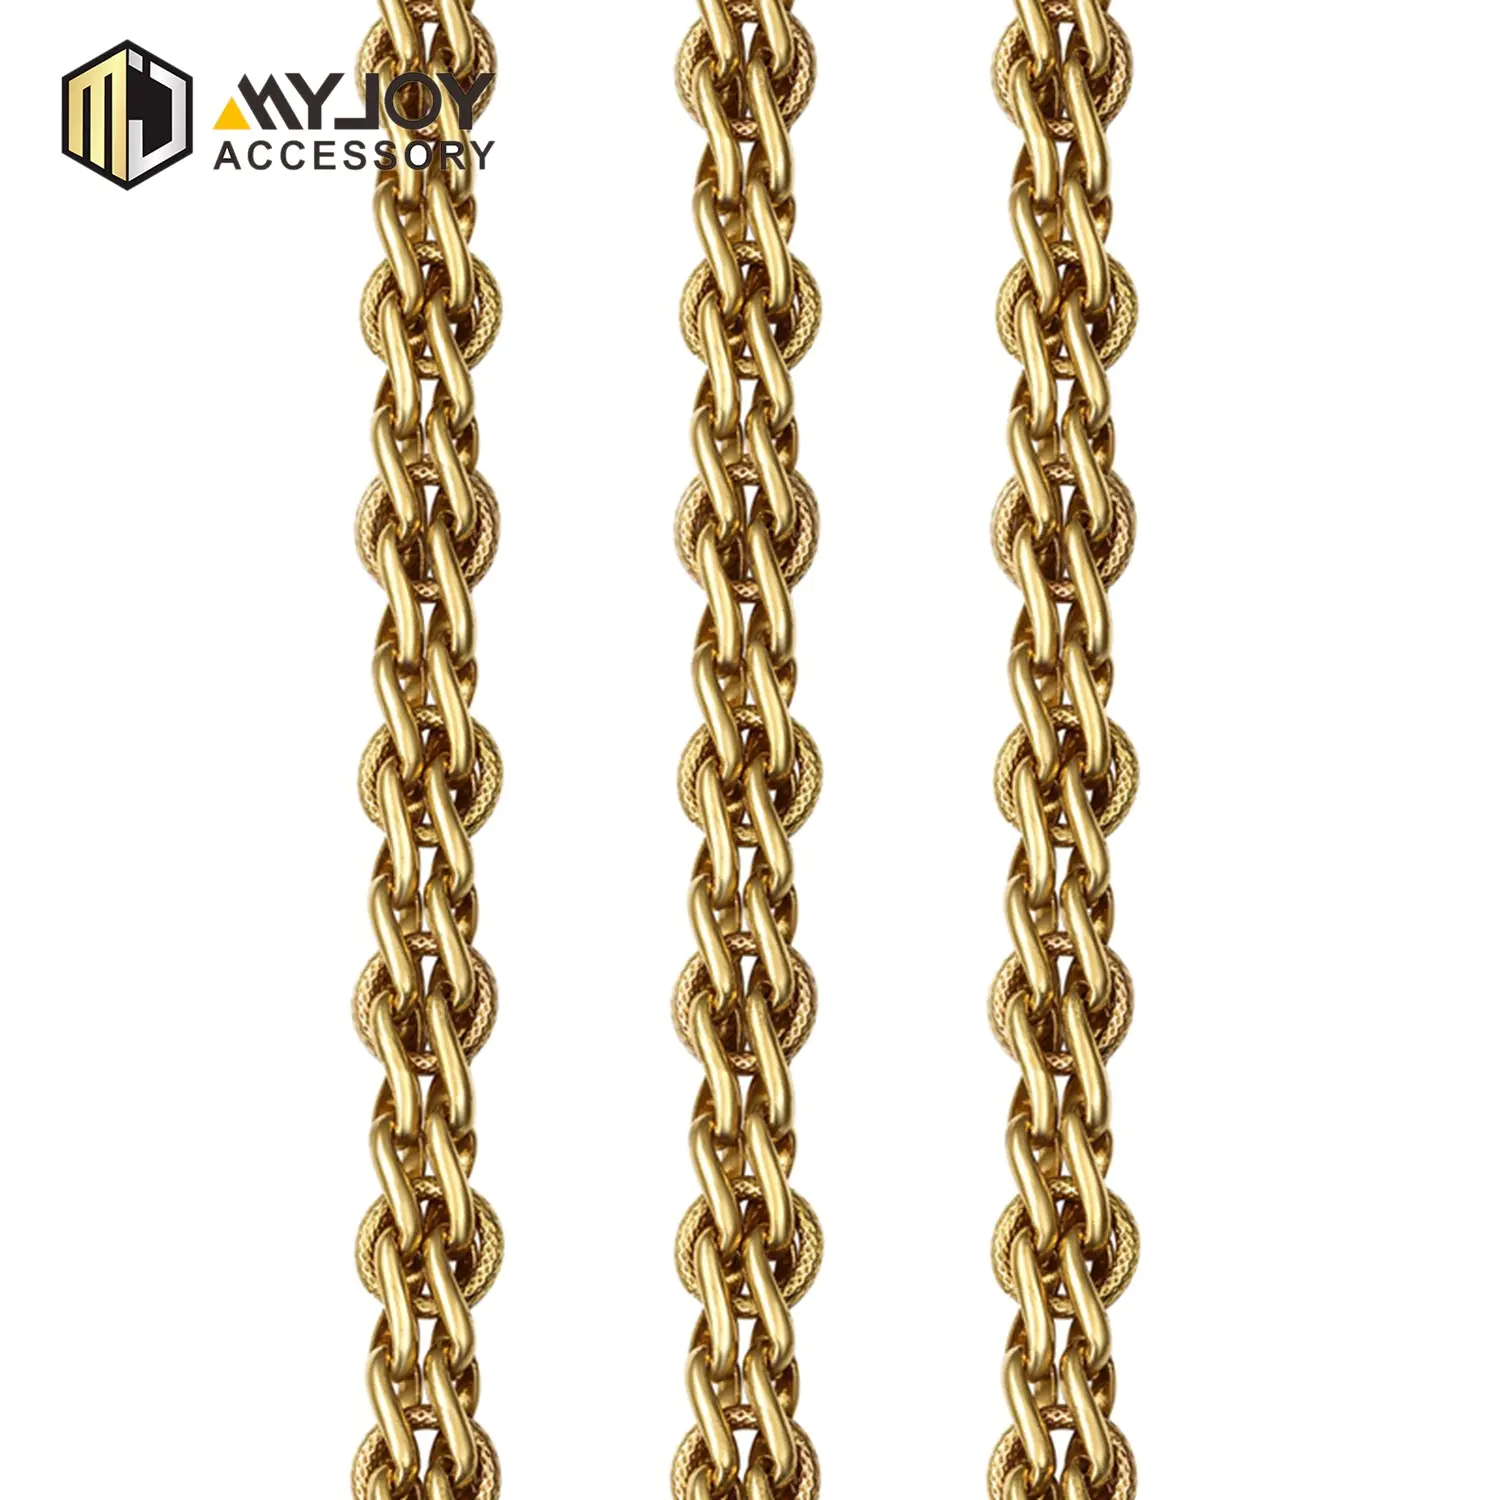 MYJOY zinc chain strap company for bags